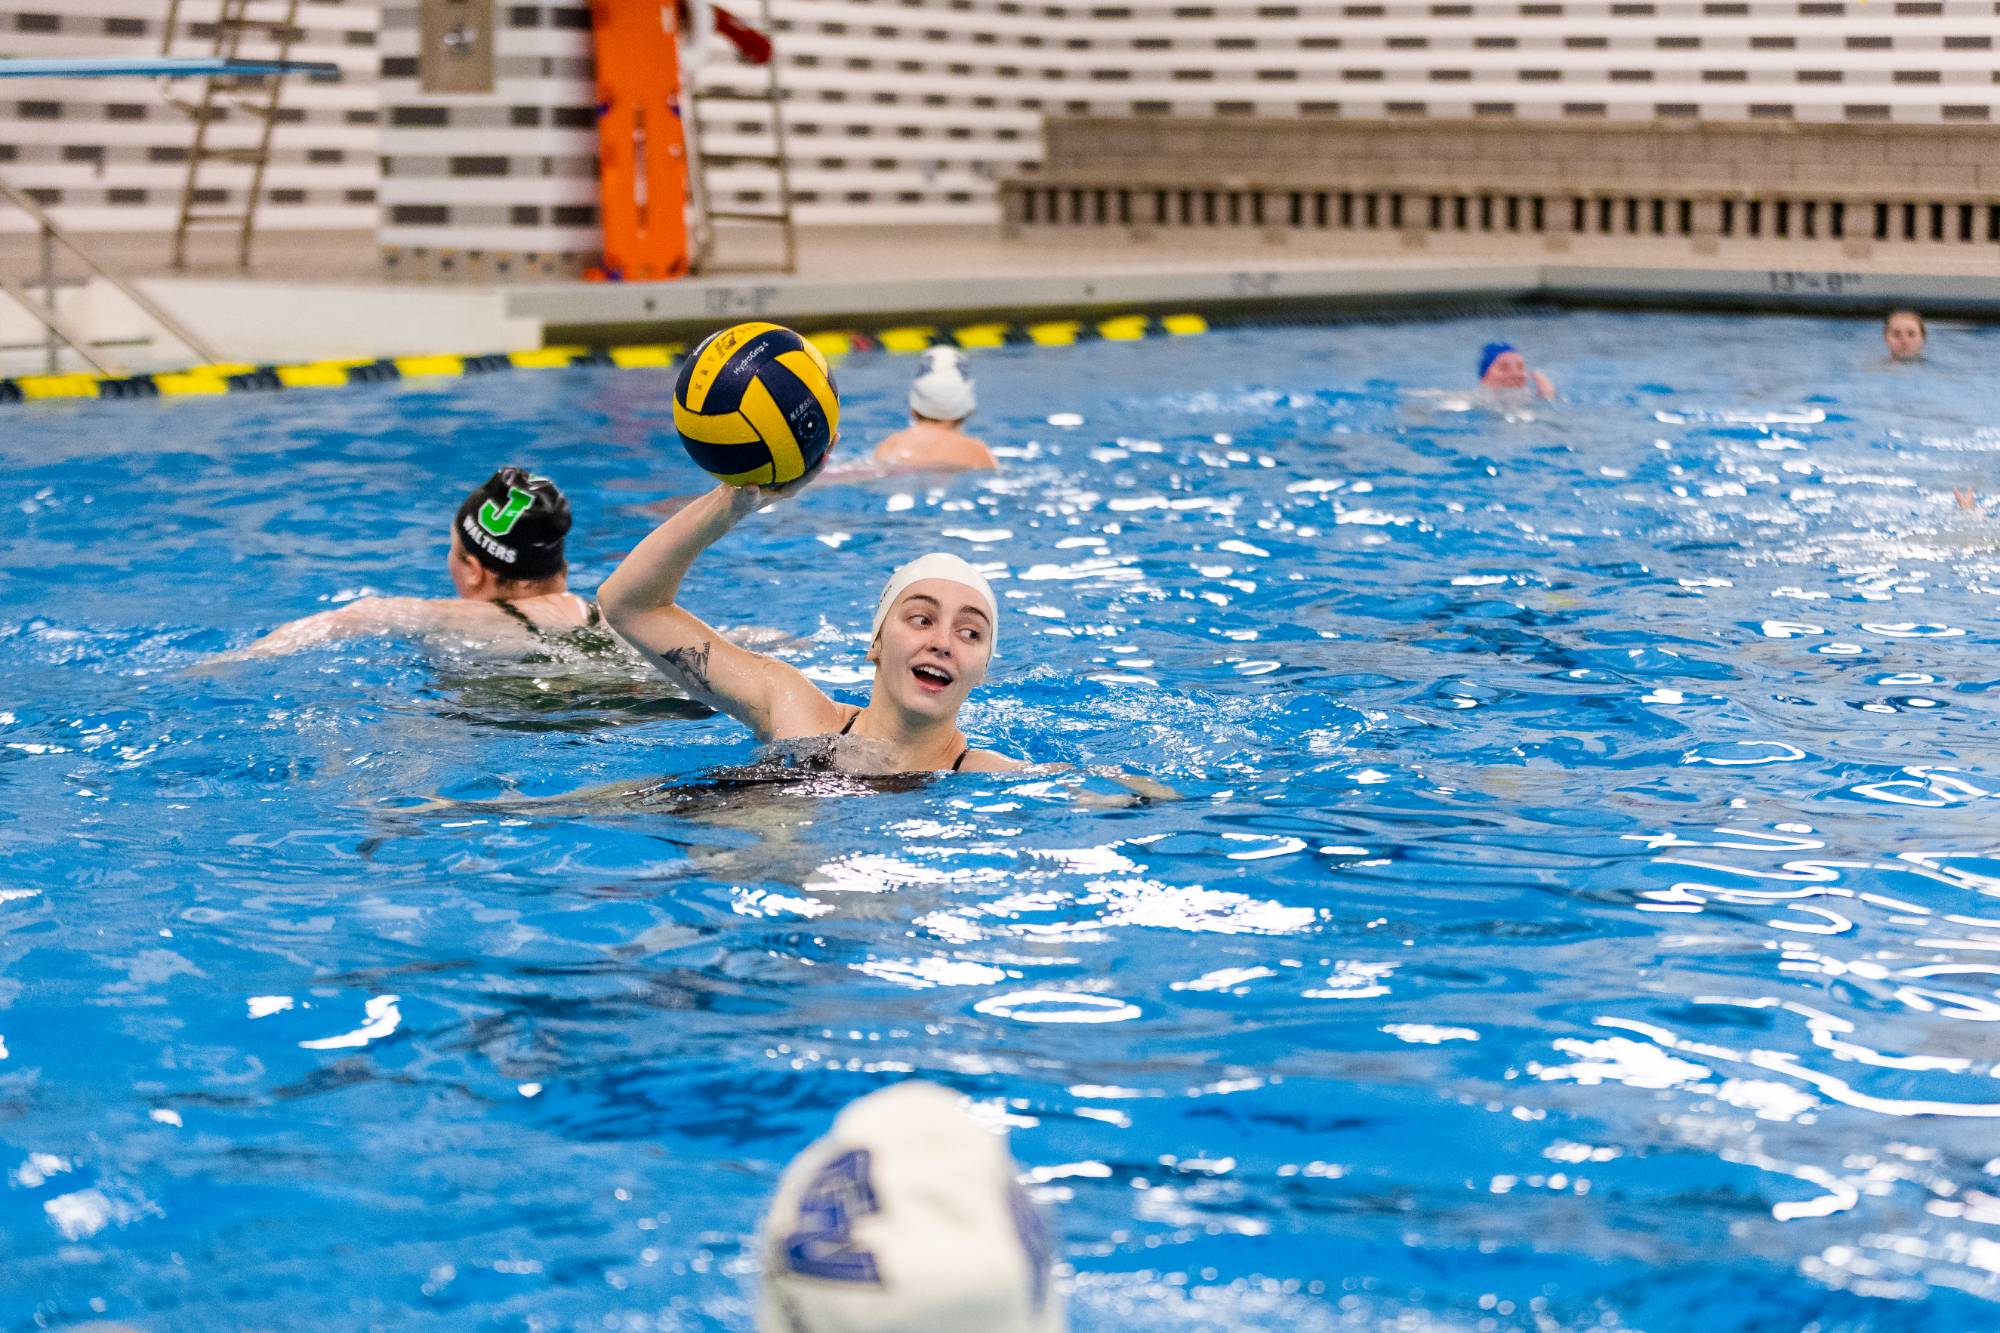 Student in a pool playing water polo. The student is holding the ball up in the air, preparing to throw.